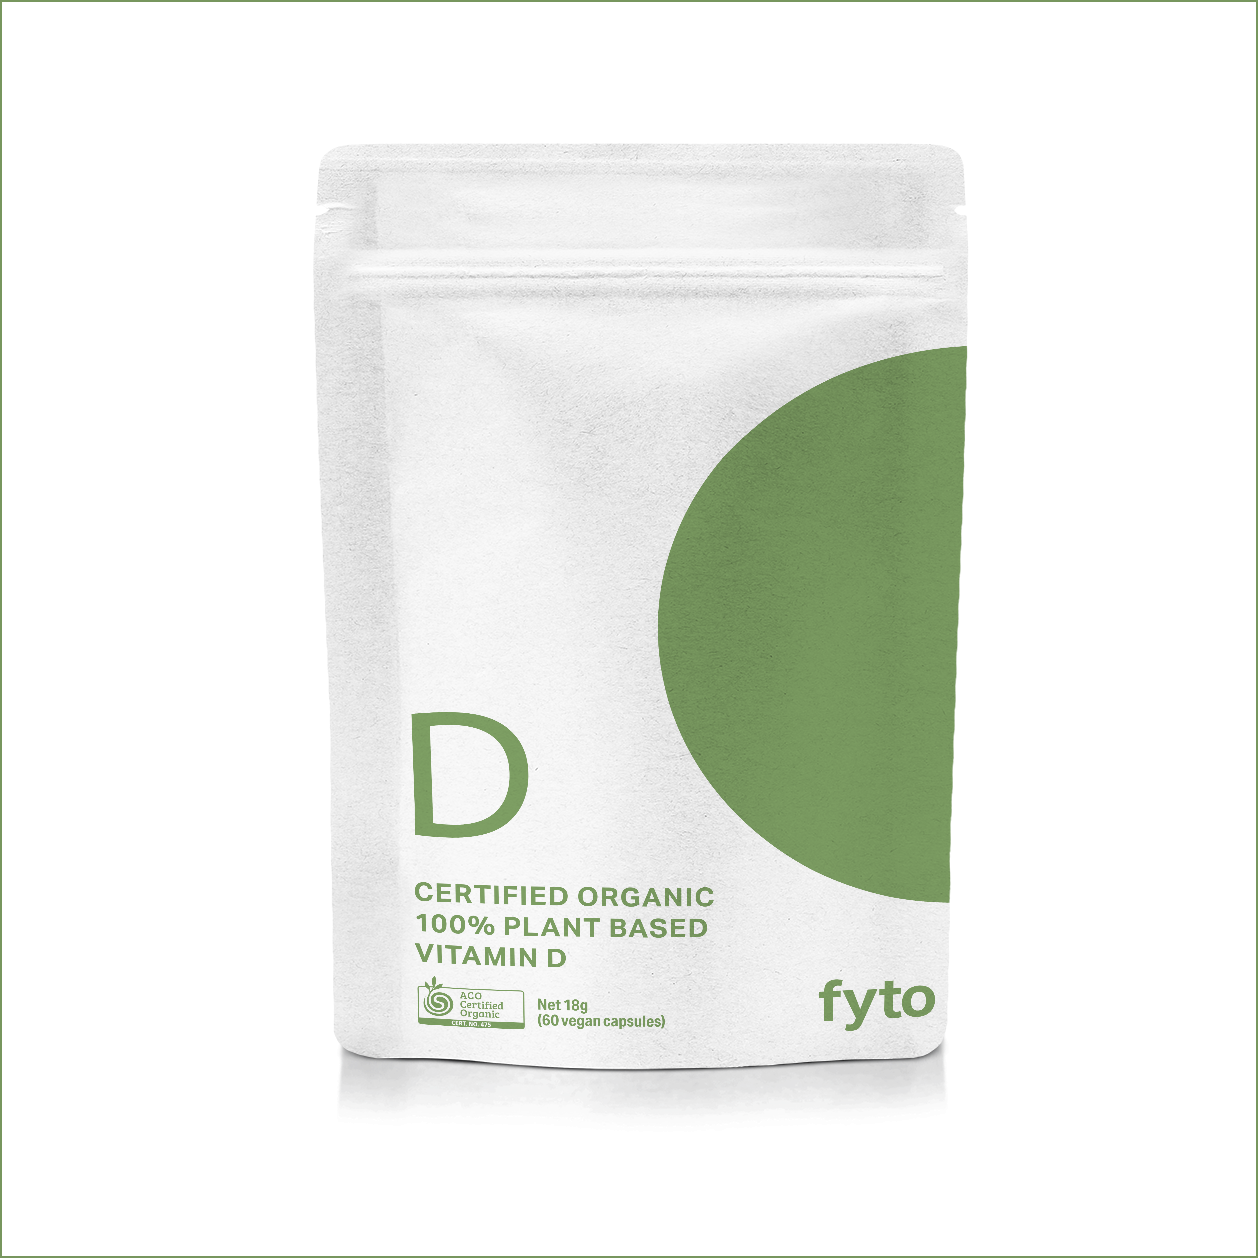 Fyto Vitamin D Certified Organic 100% Plant based 60 capsules